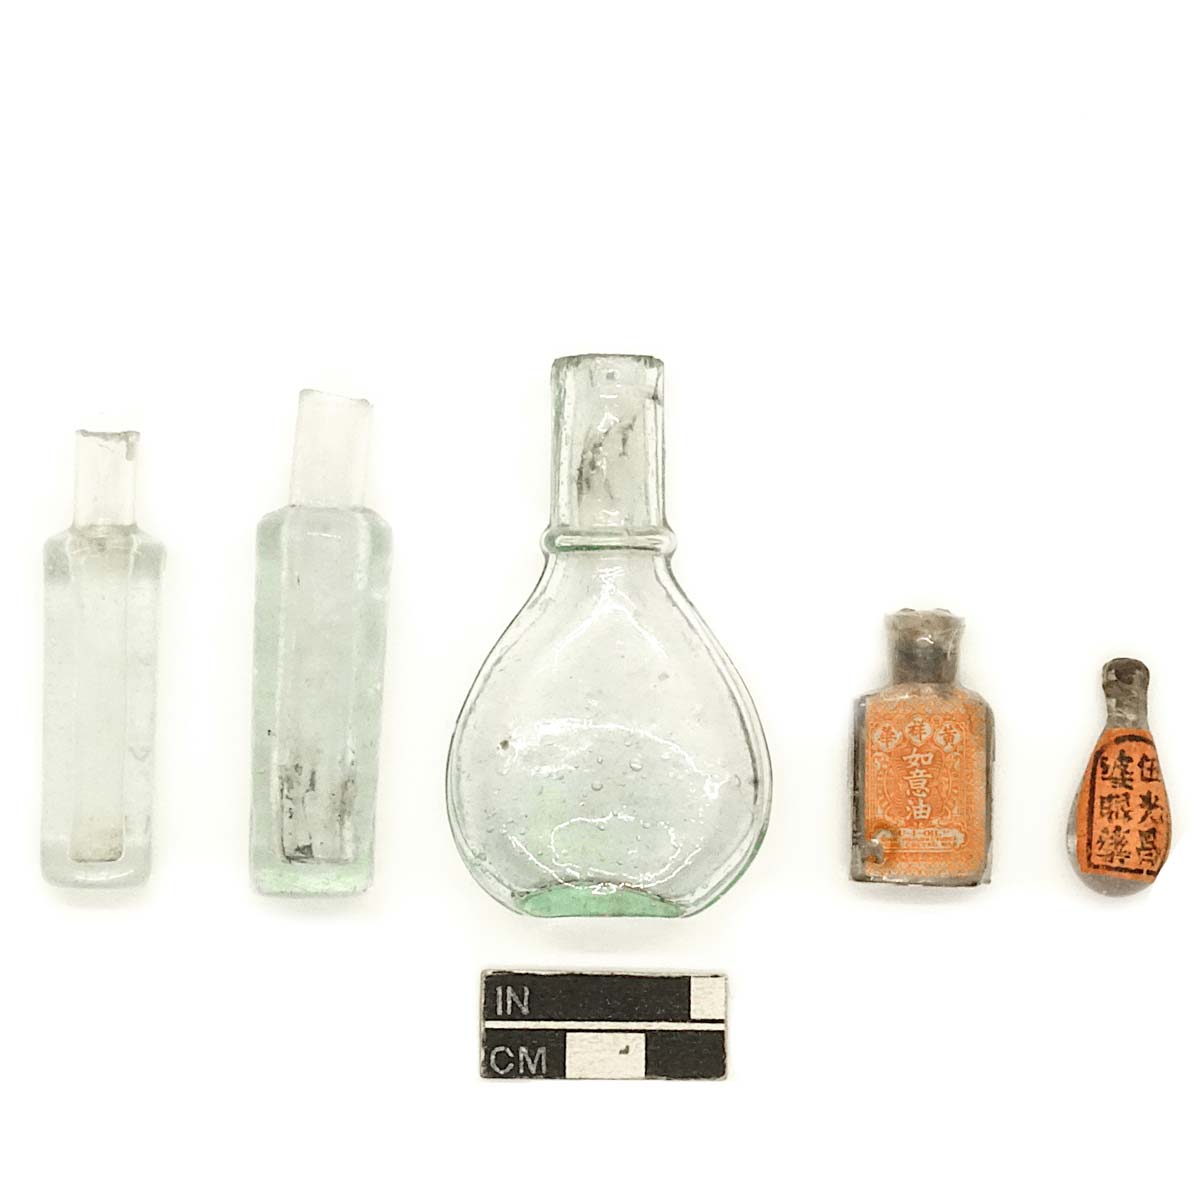 Chinese medicine bottles, aqua and colorless glass